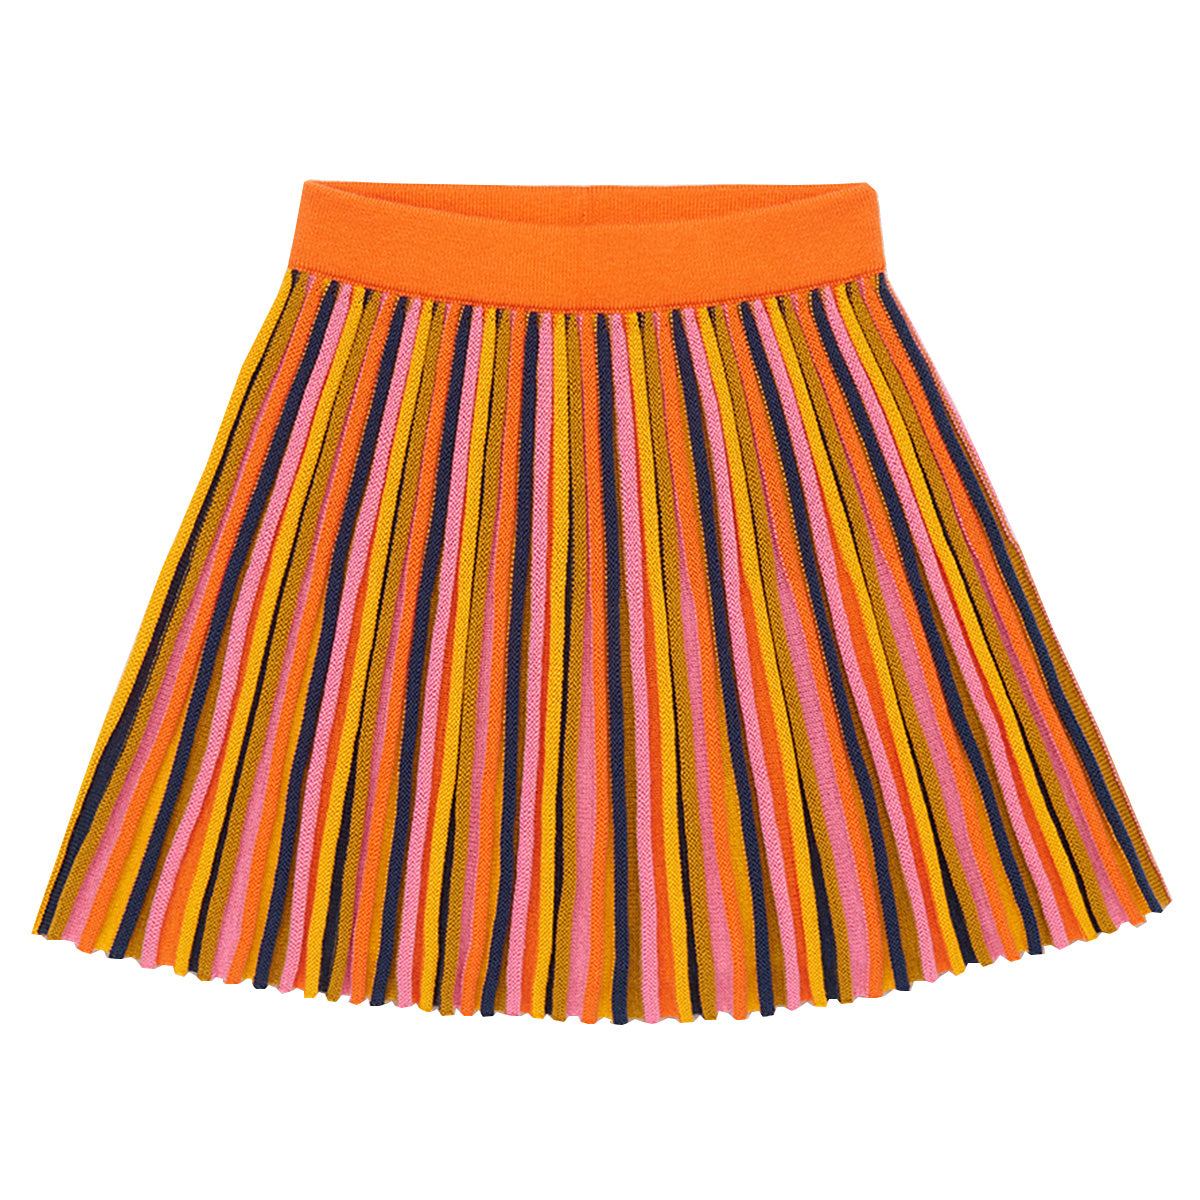 The Candy Stripe Accordion Skirt from Misha & Puff. A new flowy pull-on pleated skirt in a fine-gauge Pima cotton knit.